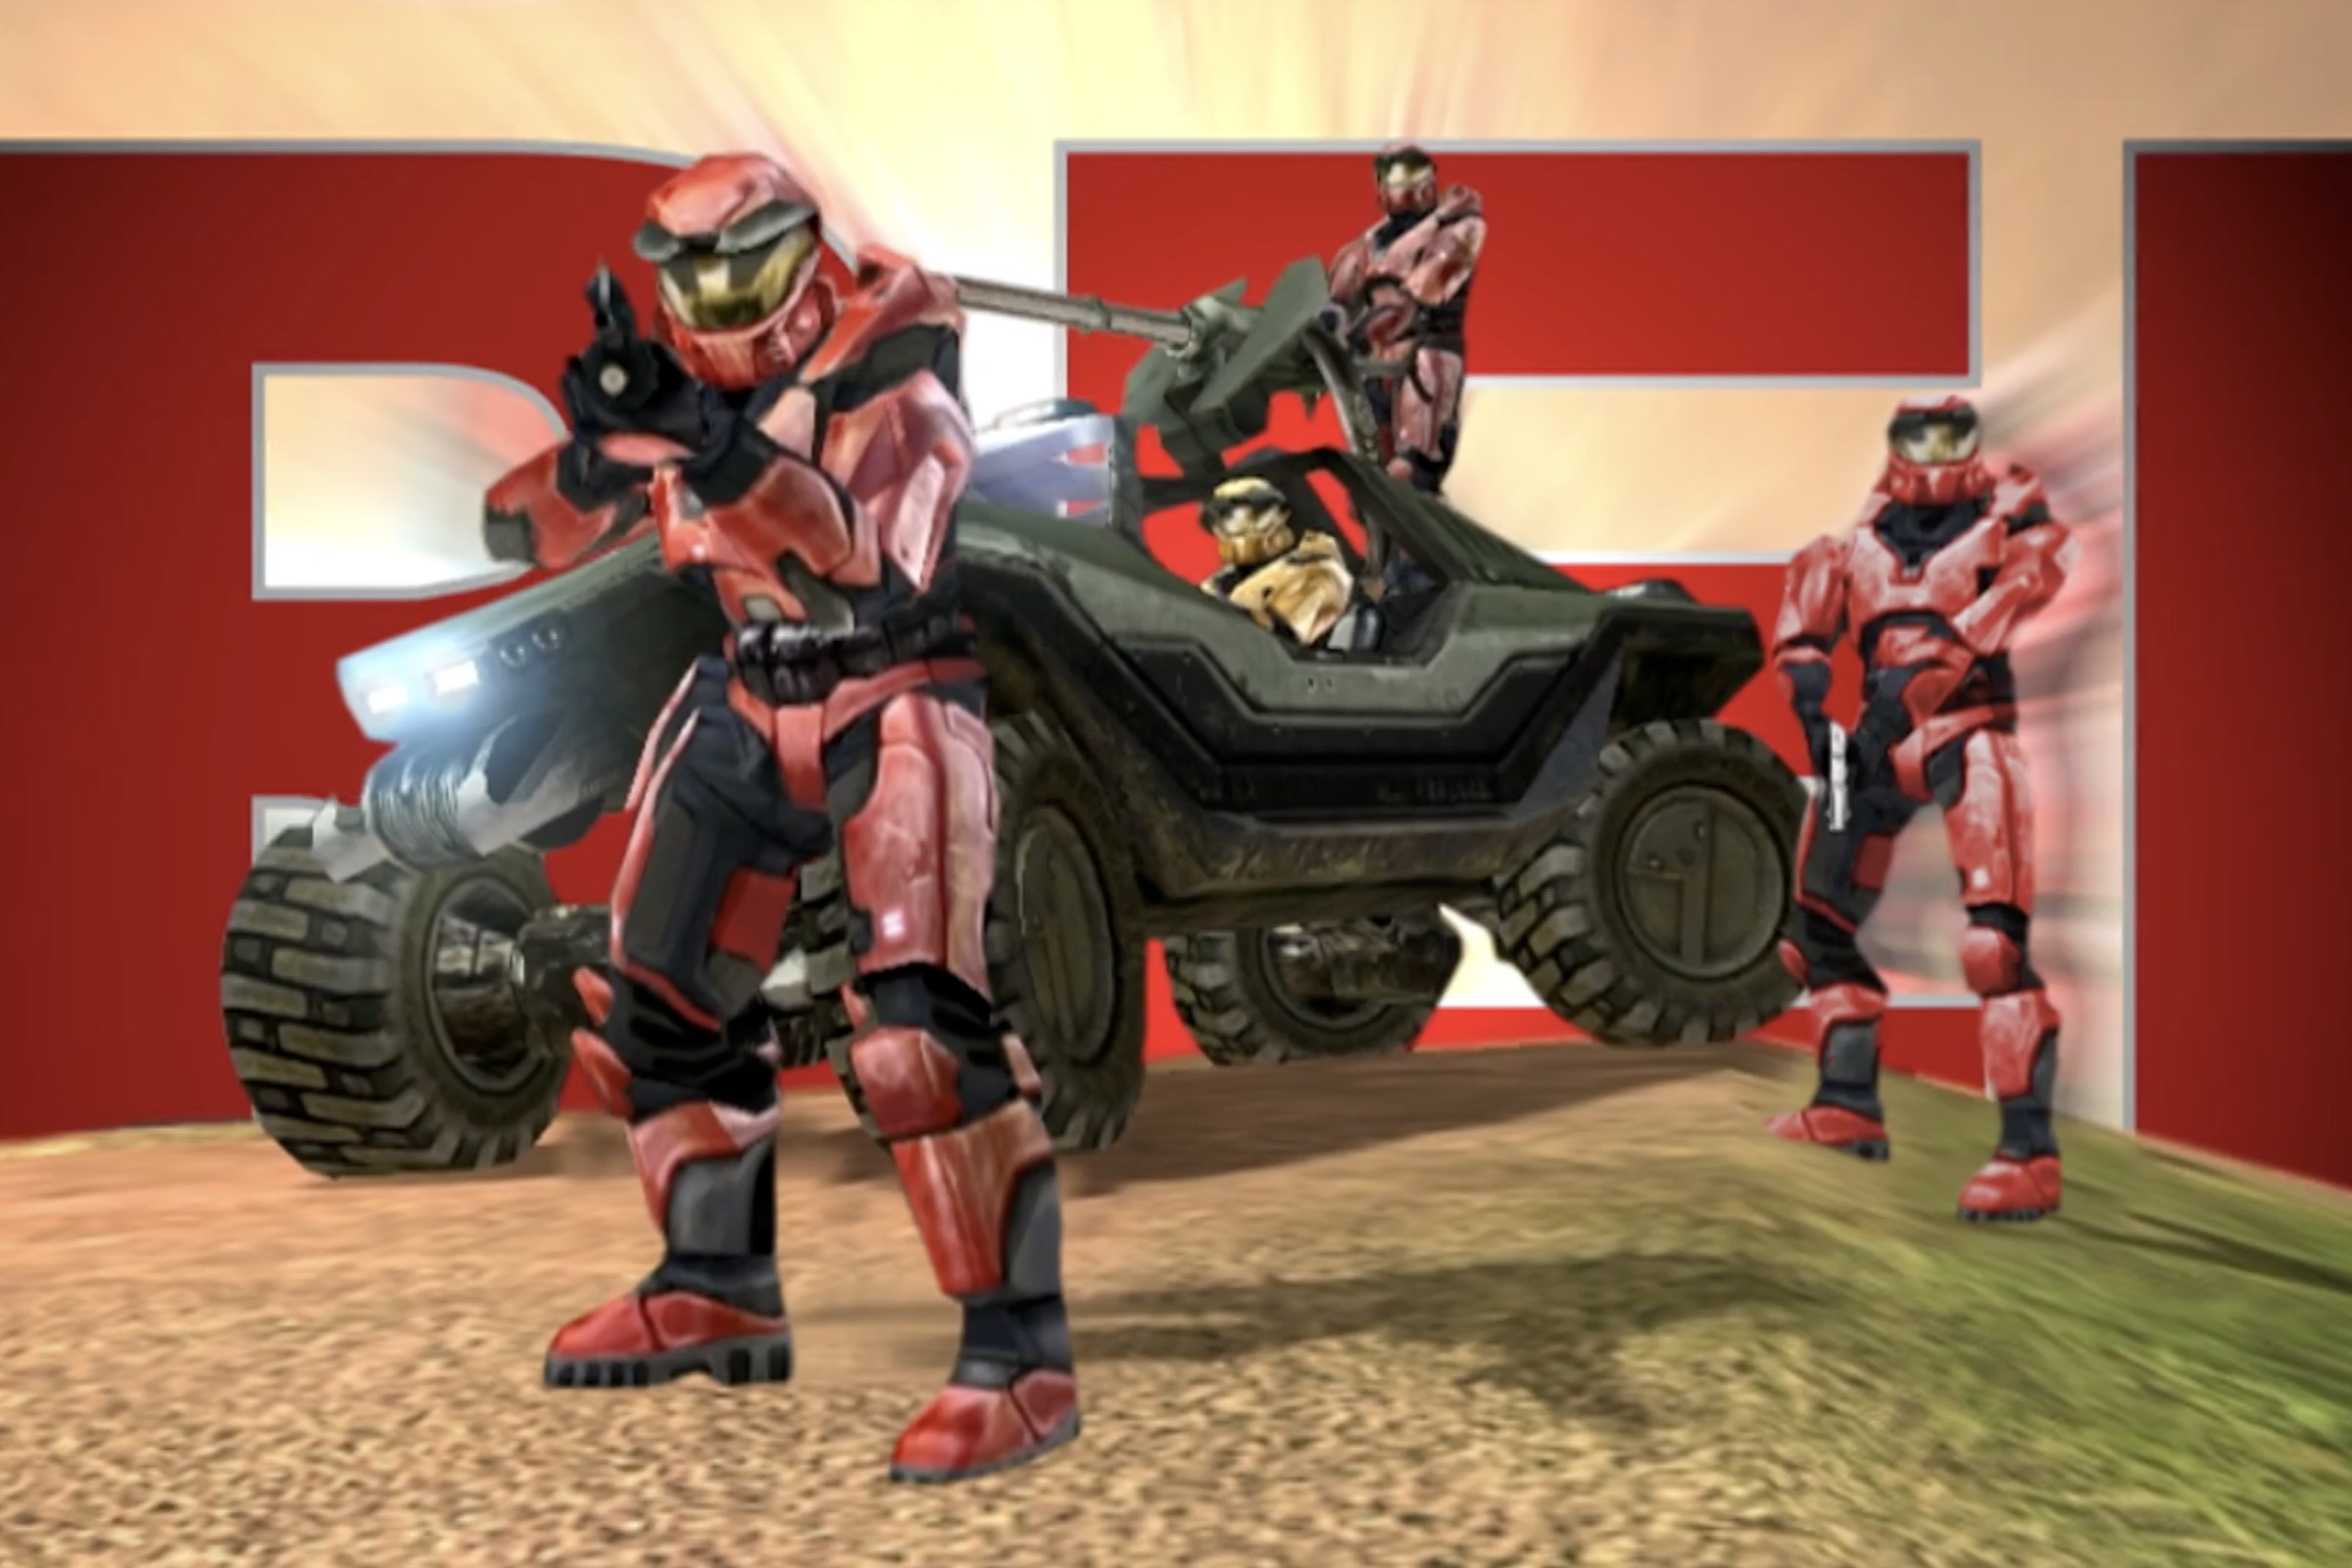 A screenshot of multiple Master Chiefs standing in front of a Warthog vehicle from Halo.